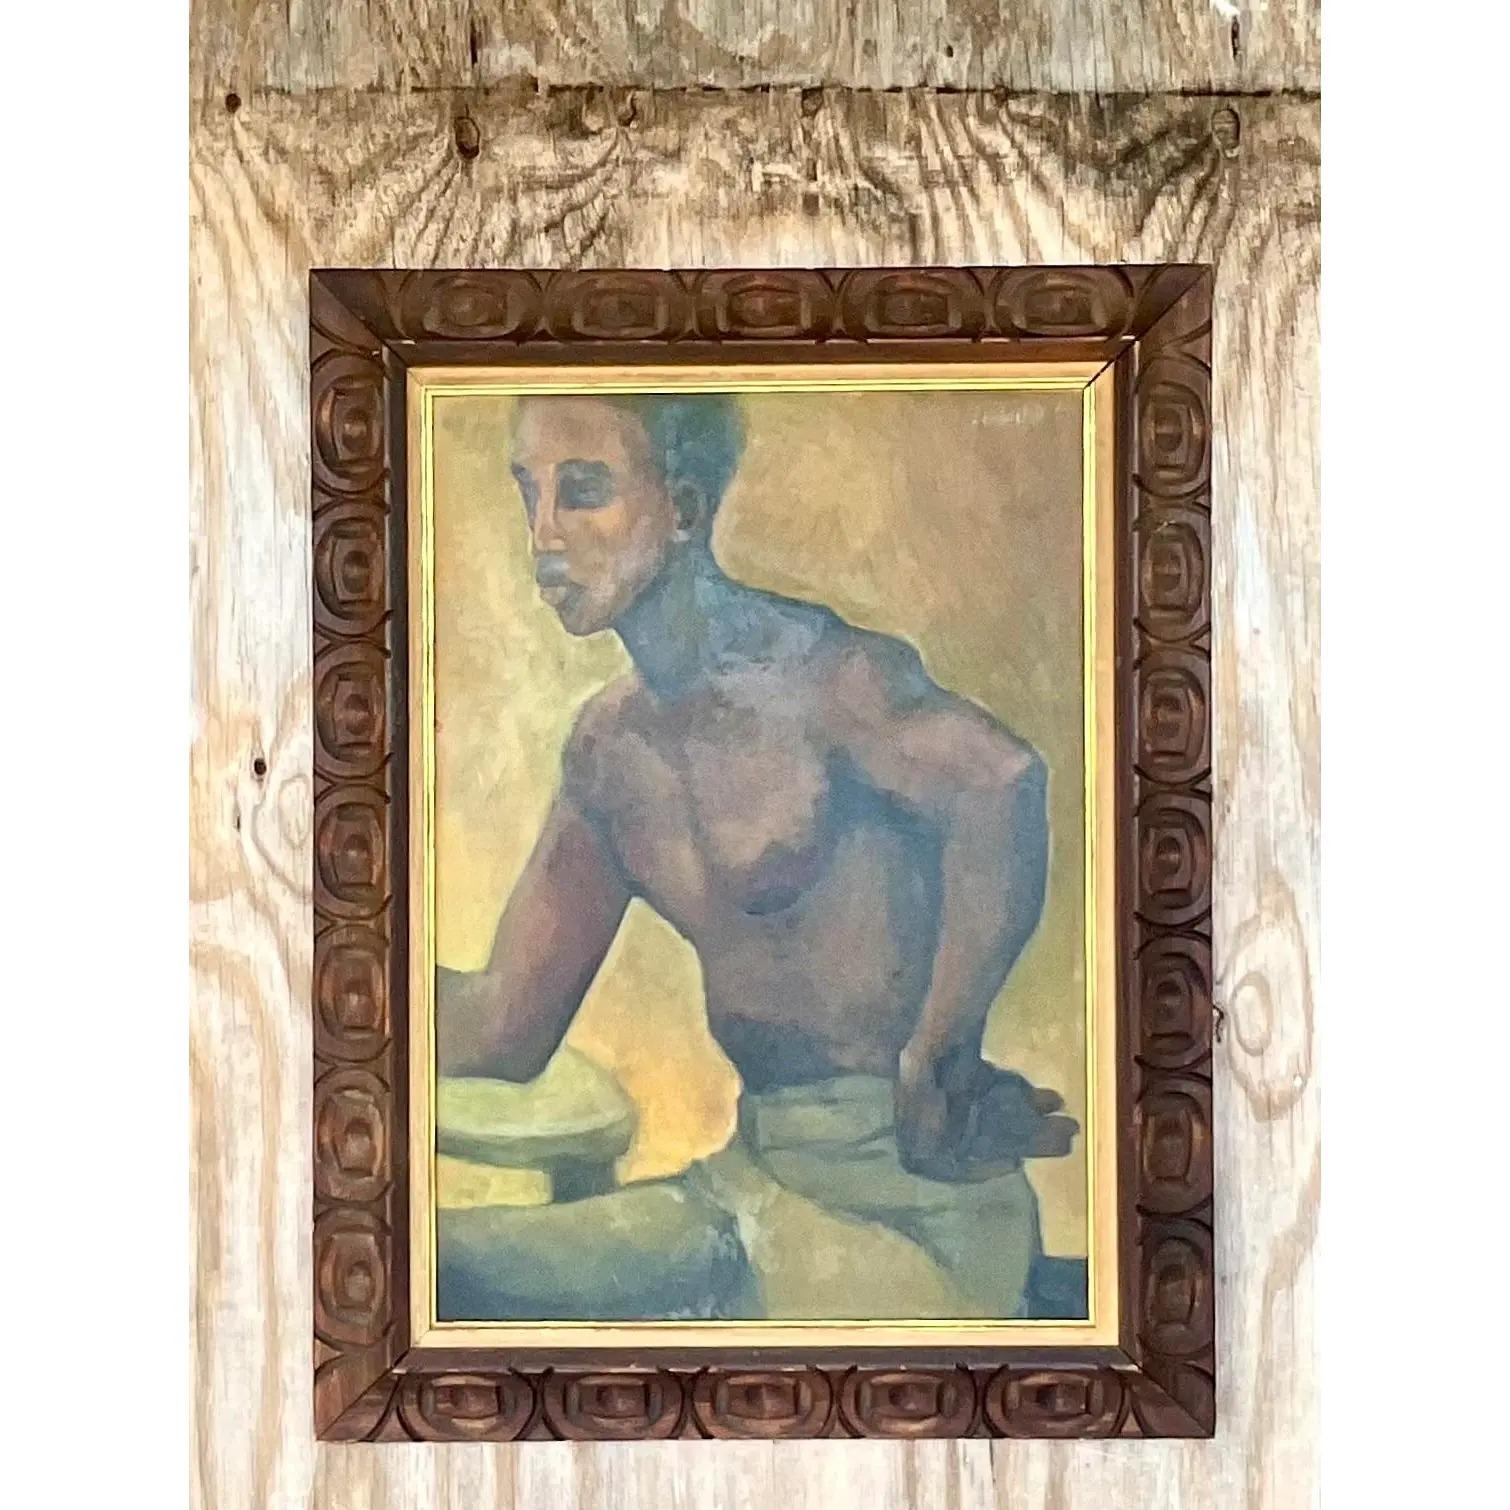 North American Vintage Original Oil Painting of a Man, Signed For Sale